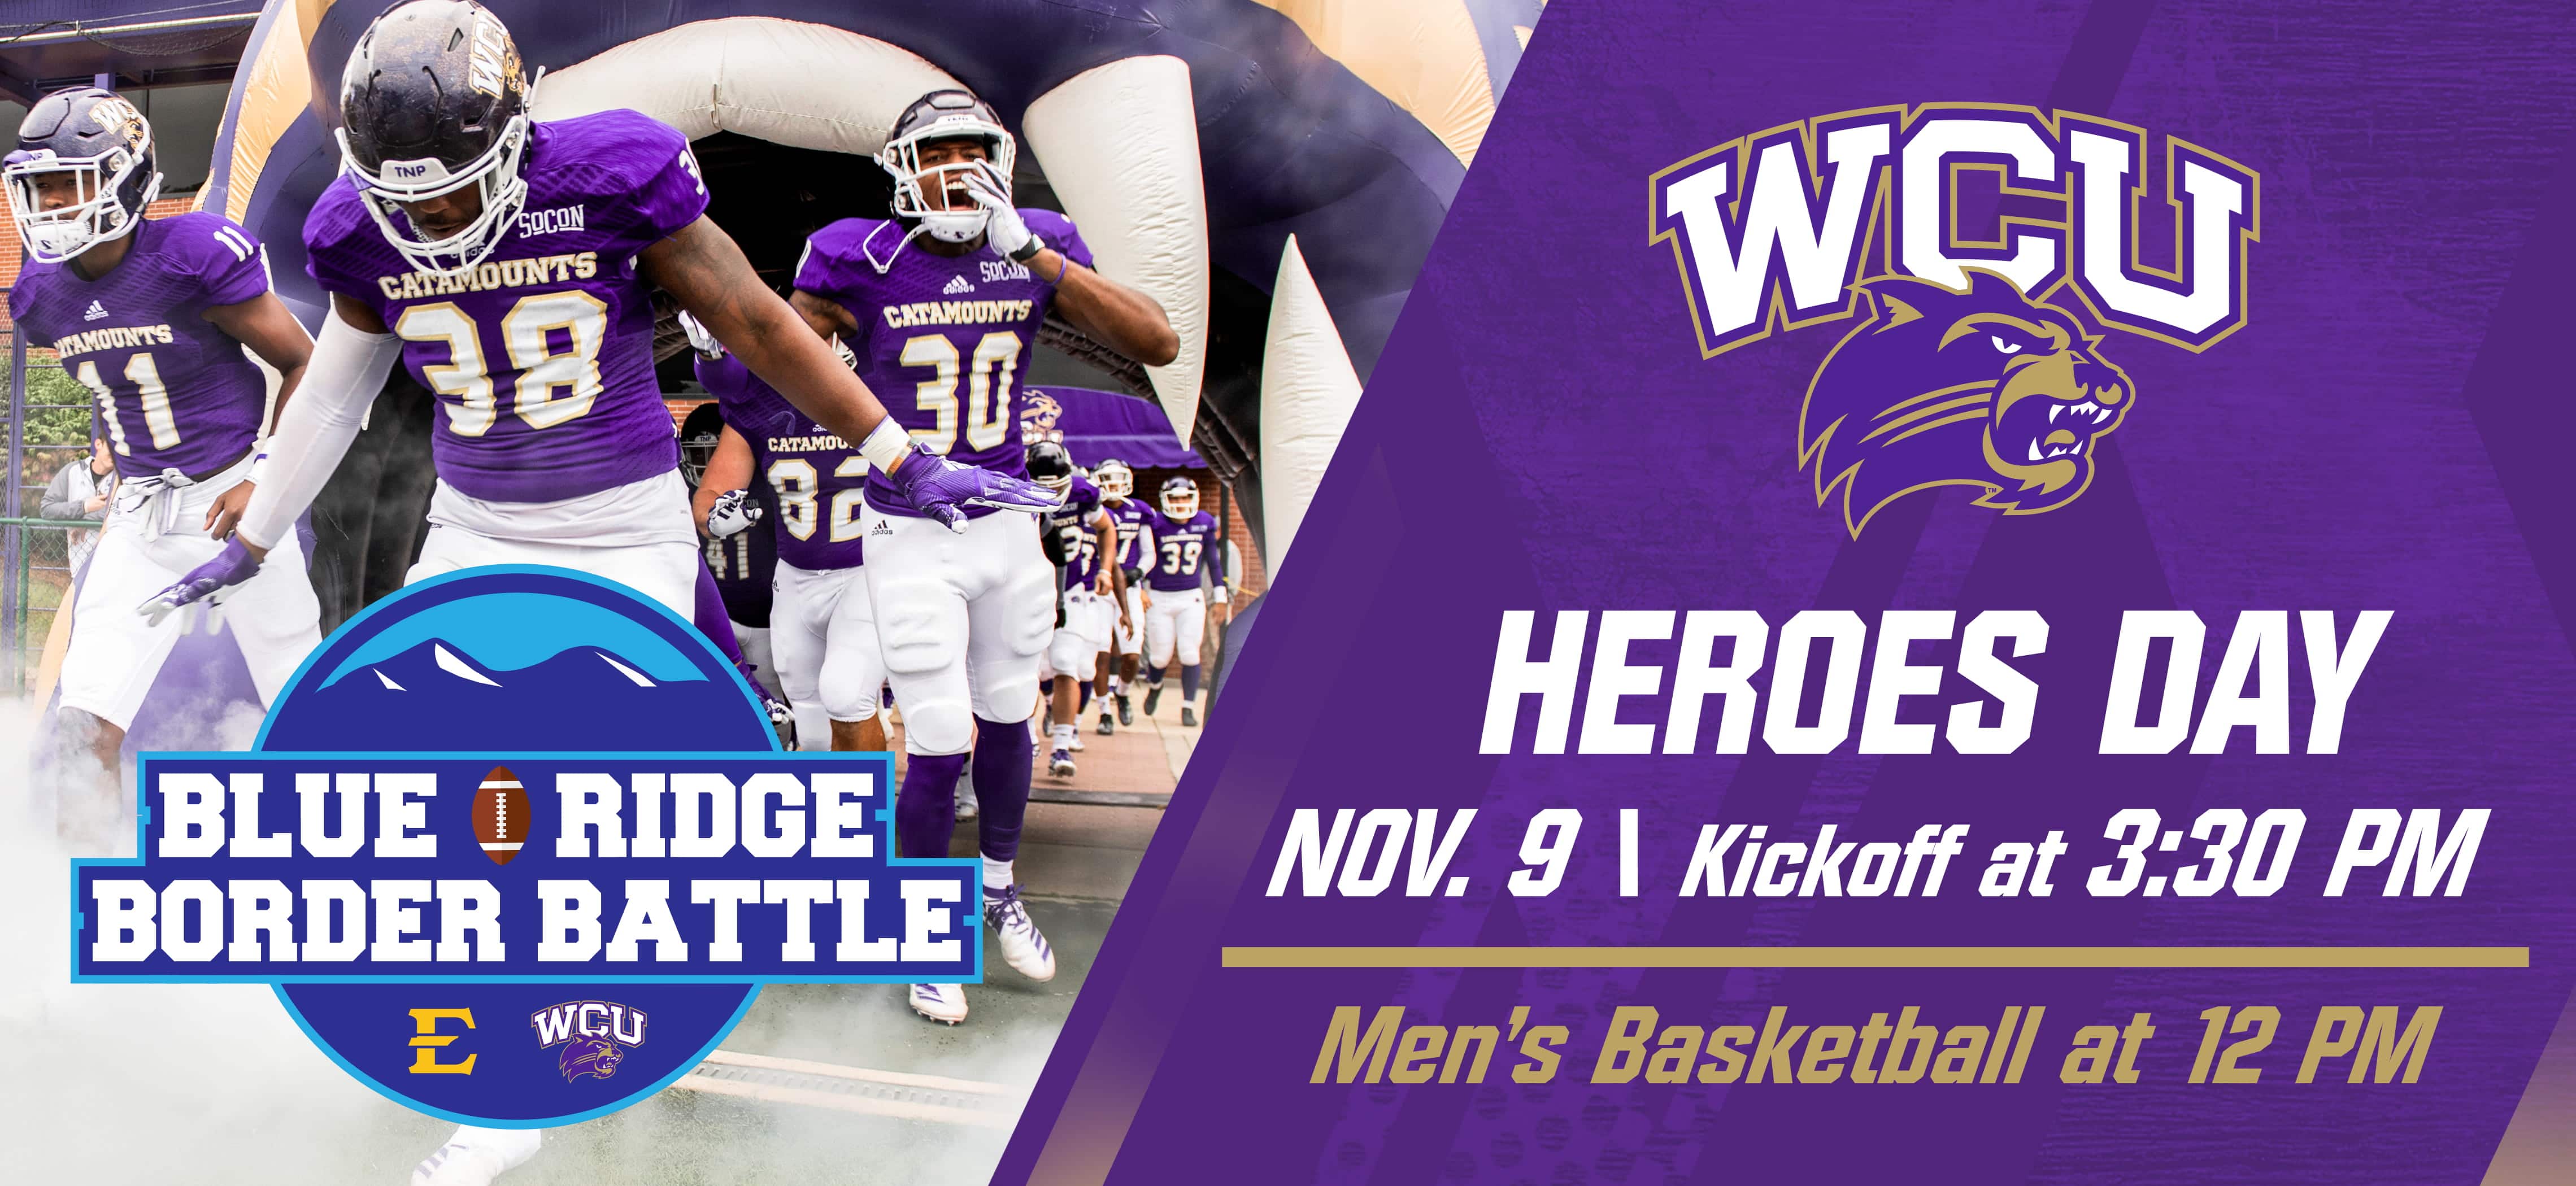 Catamount Football Players run out of the tunnel before the came! Graphic says the game time of 3:30 on Nov.9 